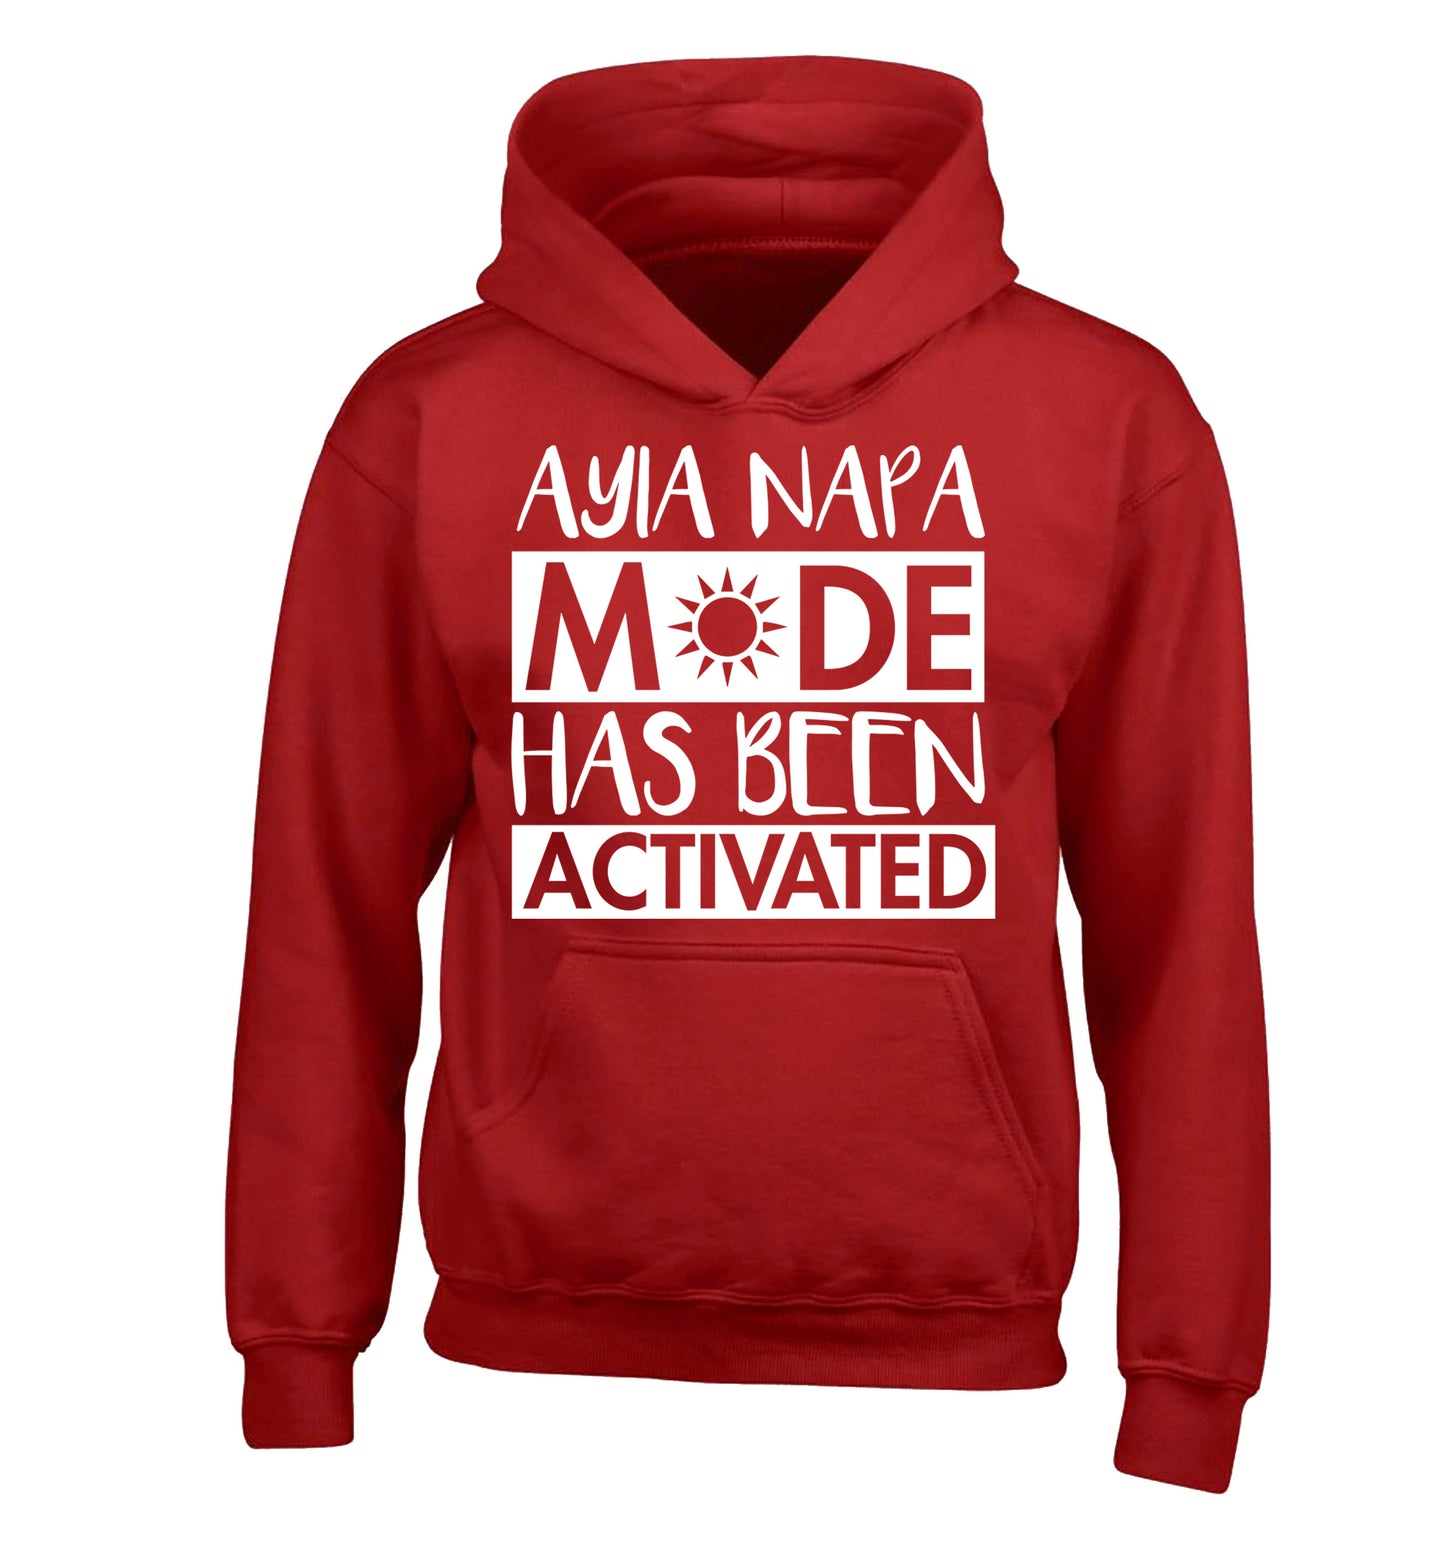 Ayia Napa mode has been activated children's red hoodie 12-13 Years